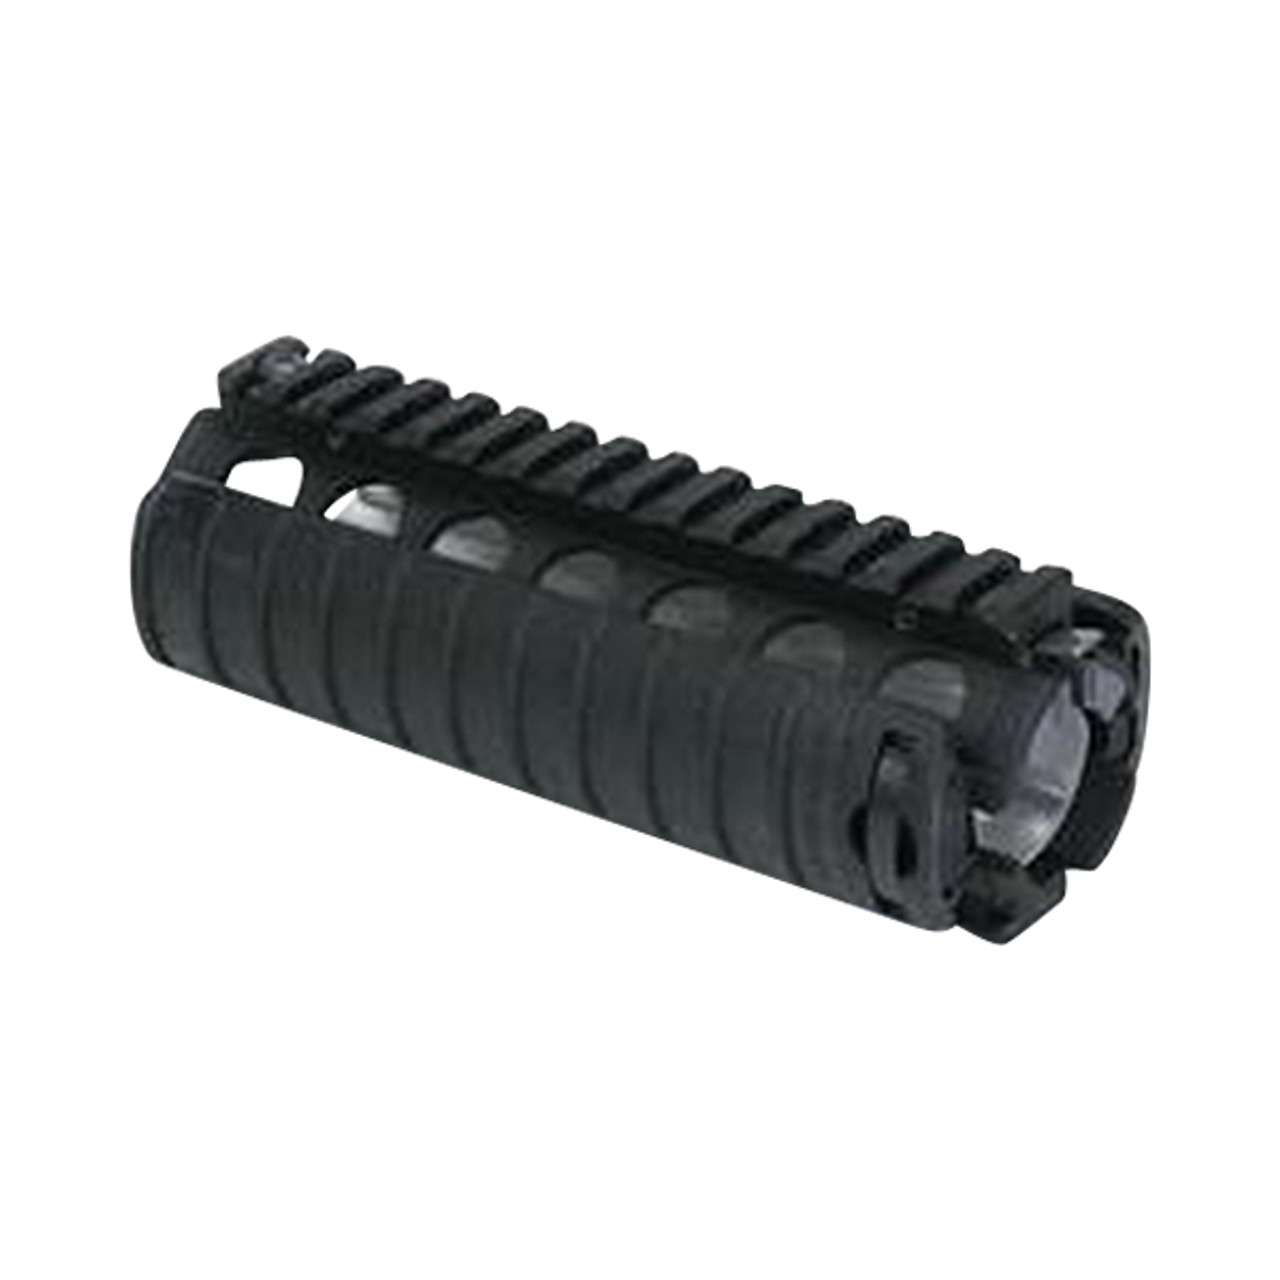 Knights Armament KAC M4 RAS with 3 ribbed panels, new - Charlie's ...